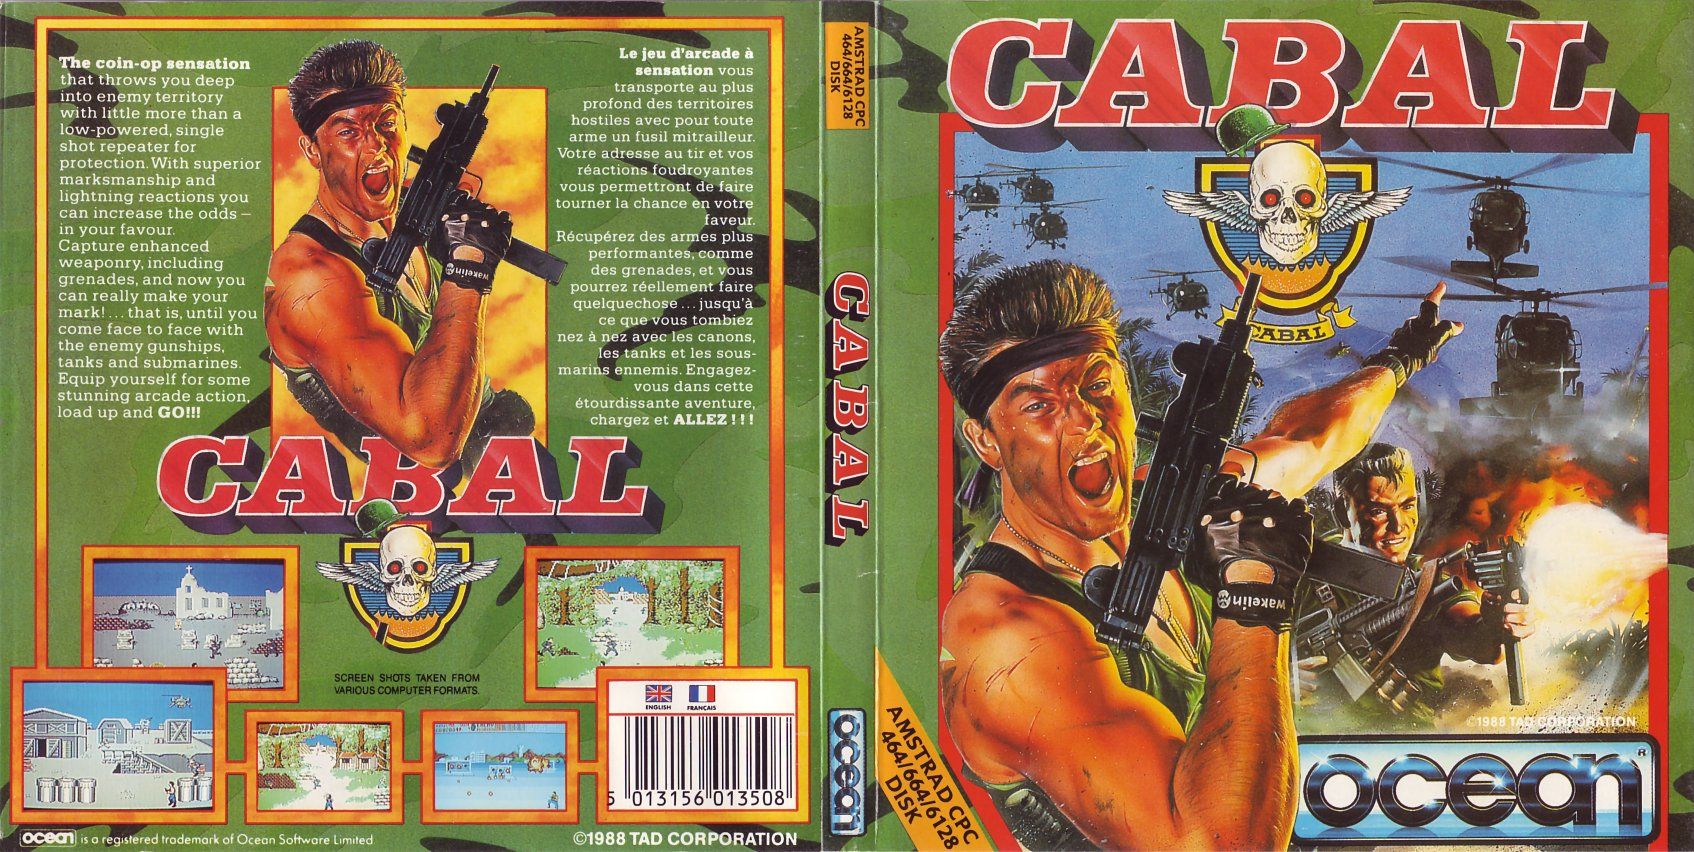 cover of the Amstrad CPC game cabal by Mig